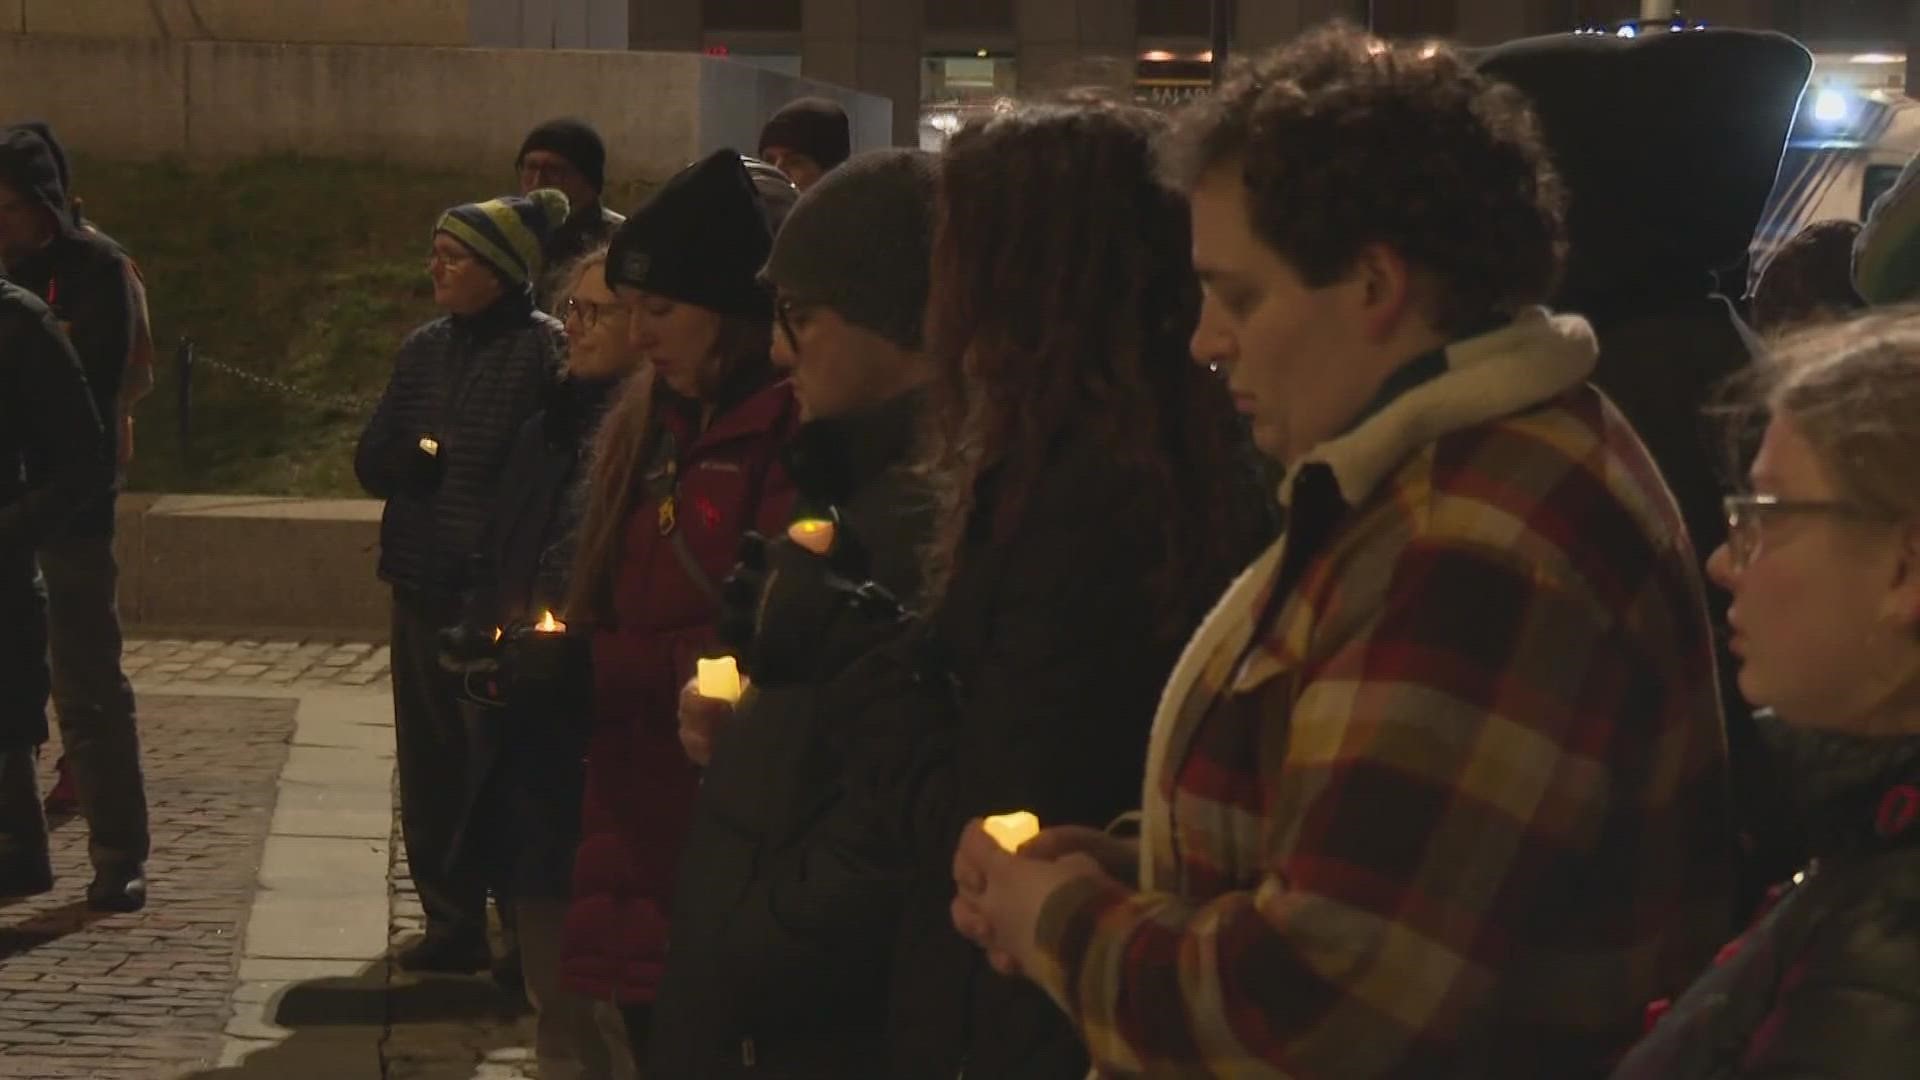 A candlelight vigil was held in Portland's Monument Square Thursday night to remember those lost to HIV/AIDS.